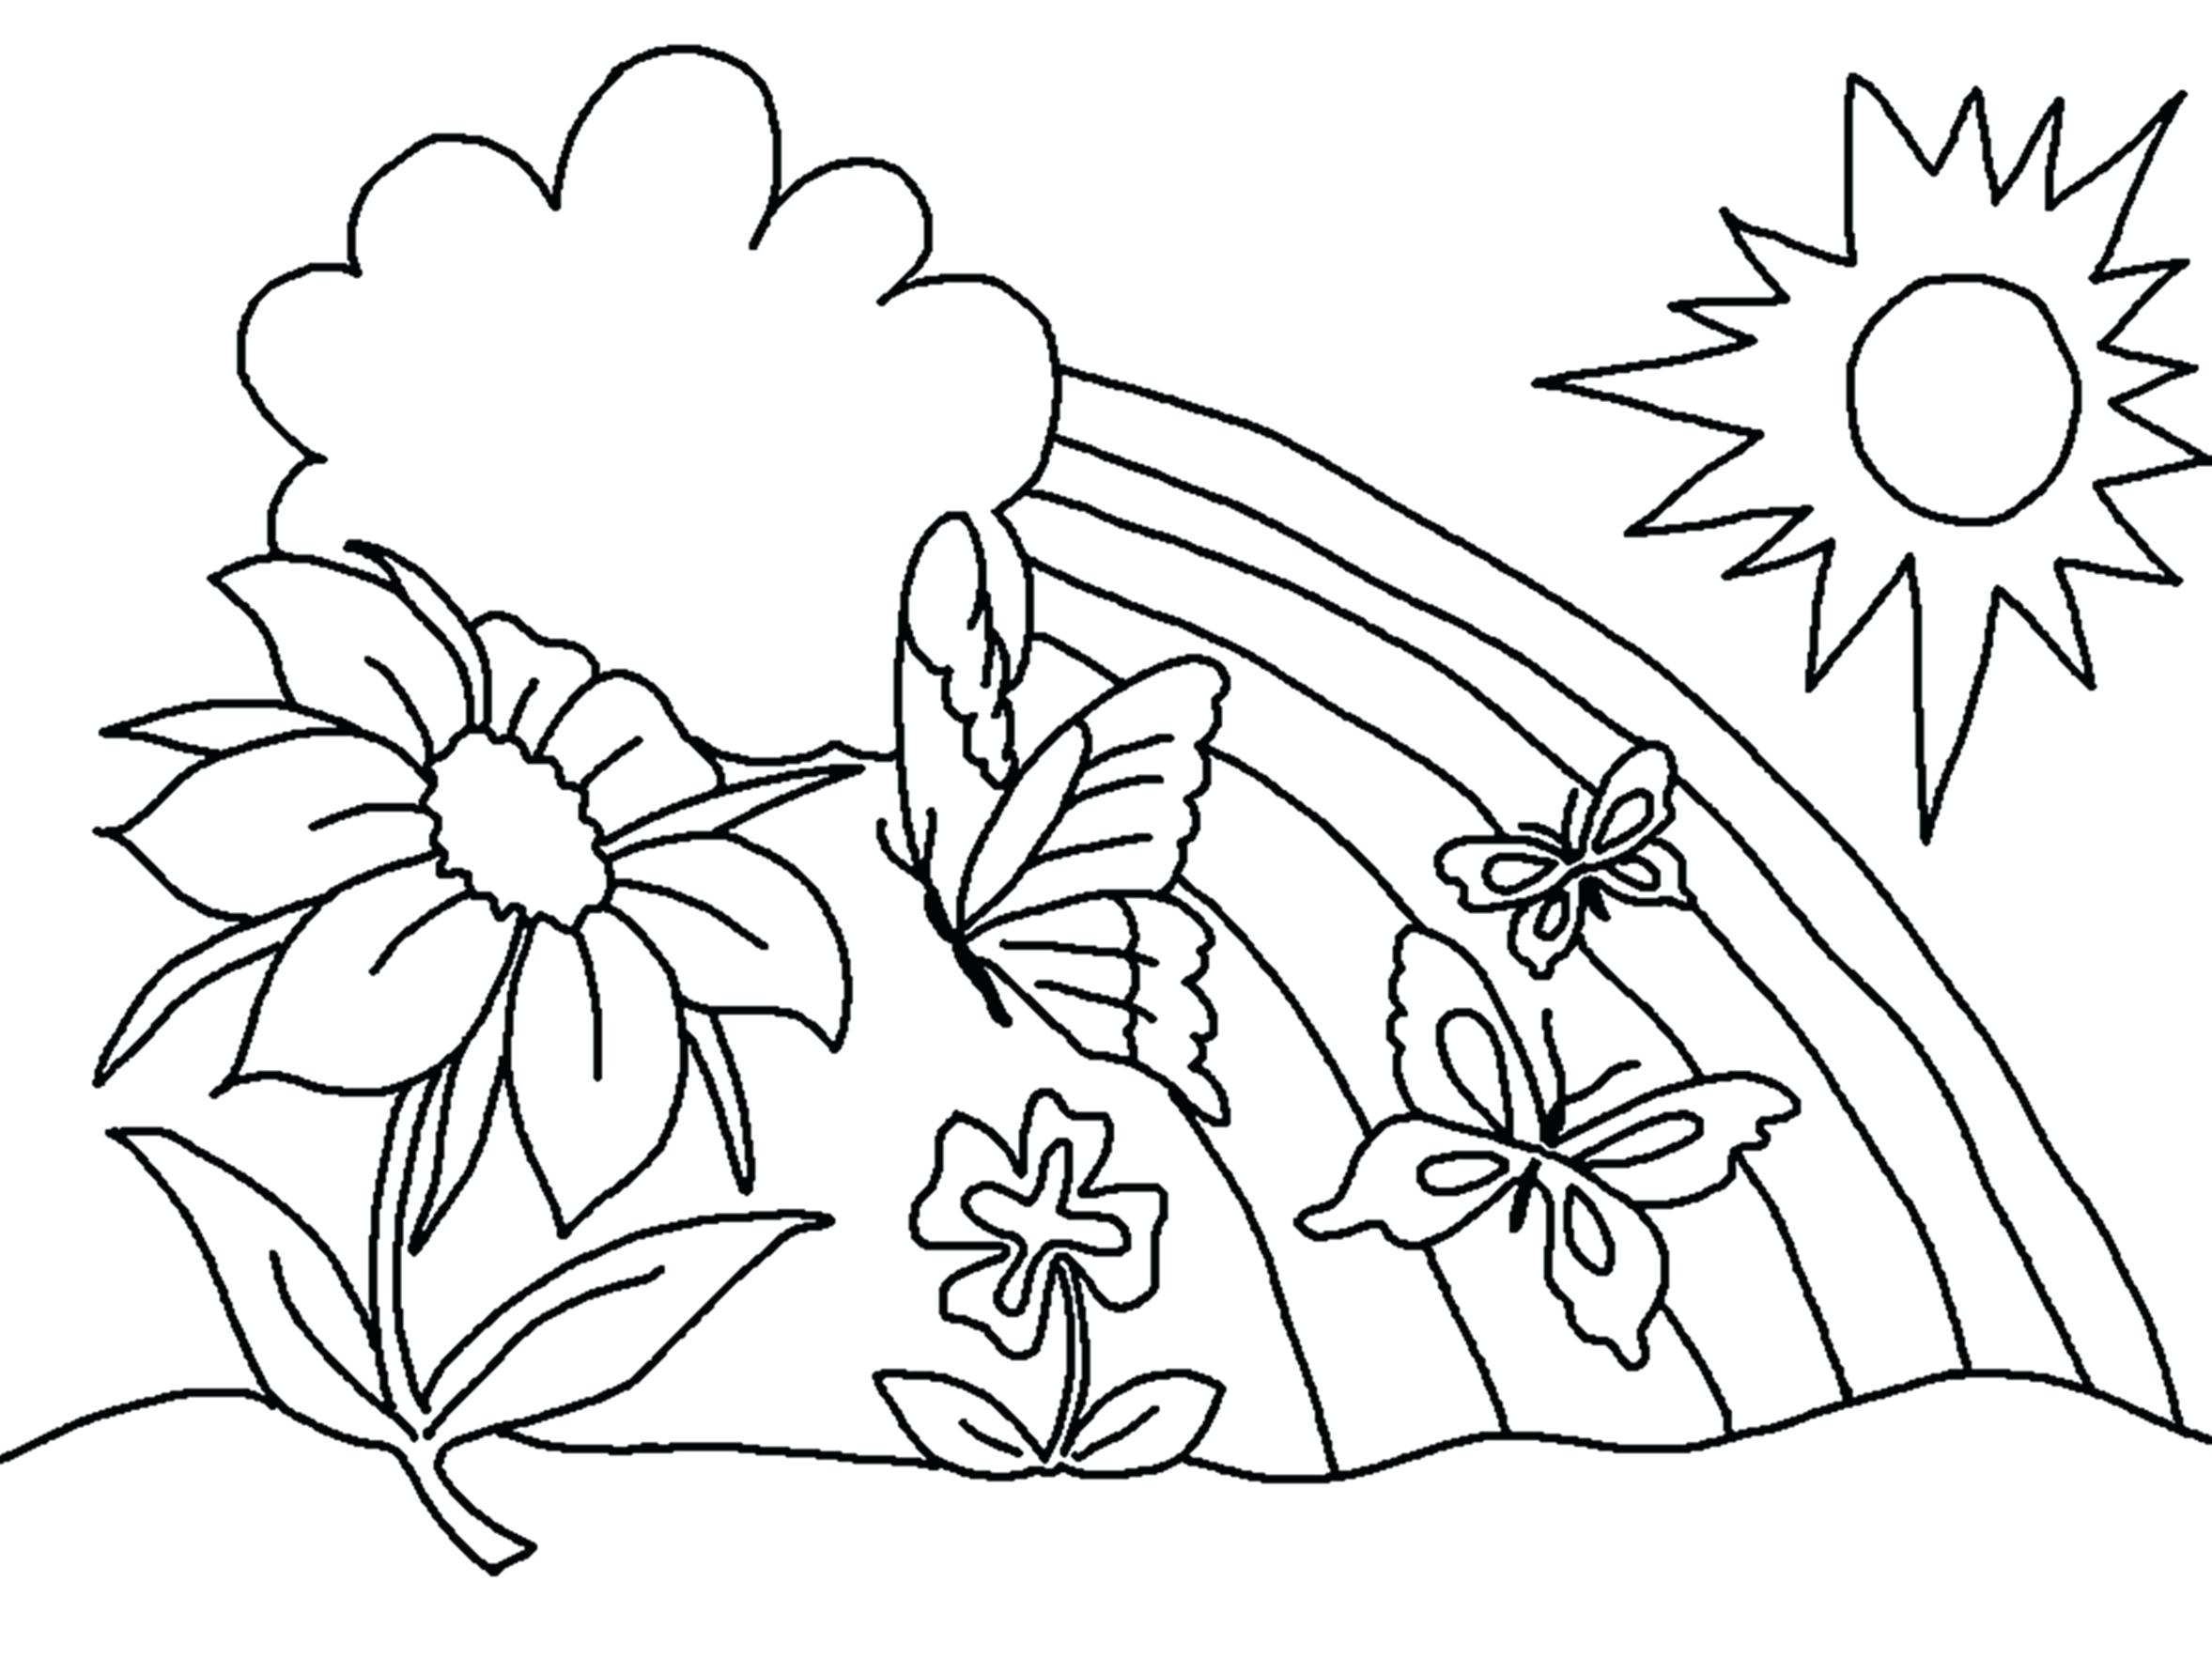 Easy Coloring Pages For Elderly